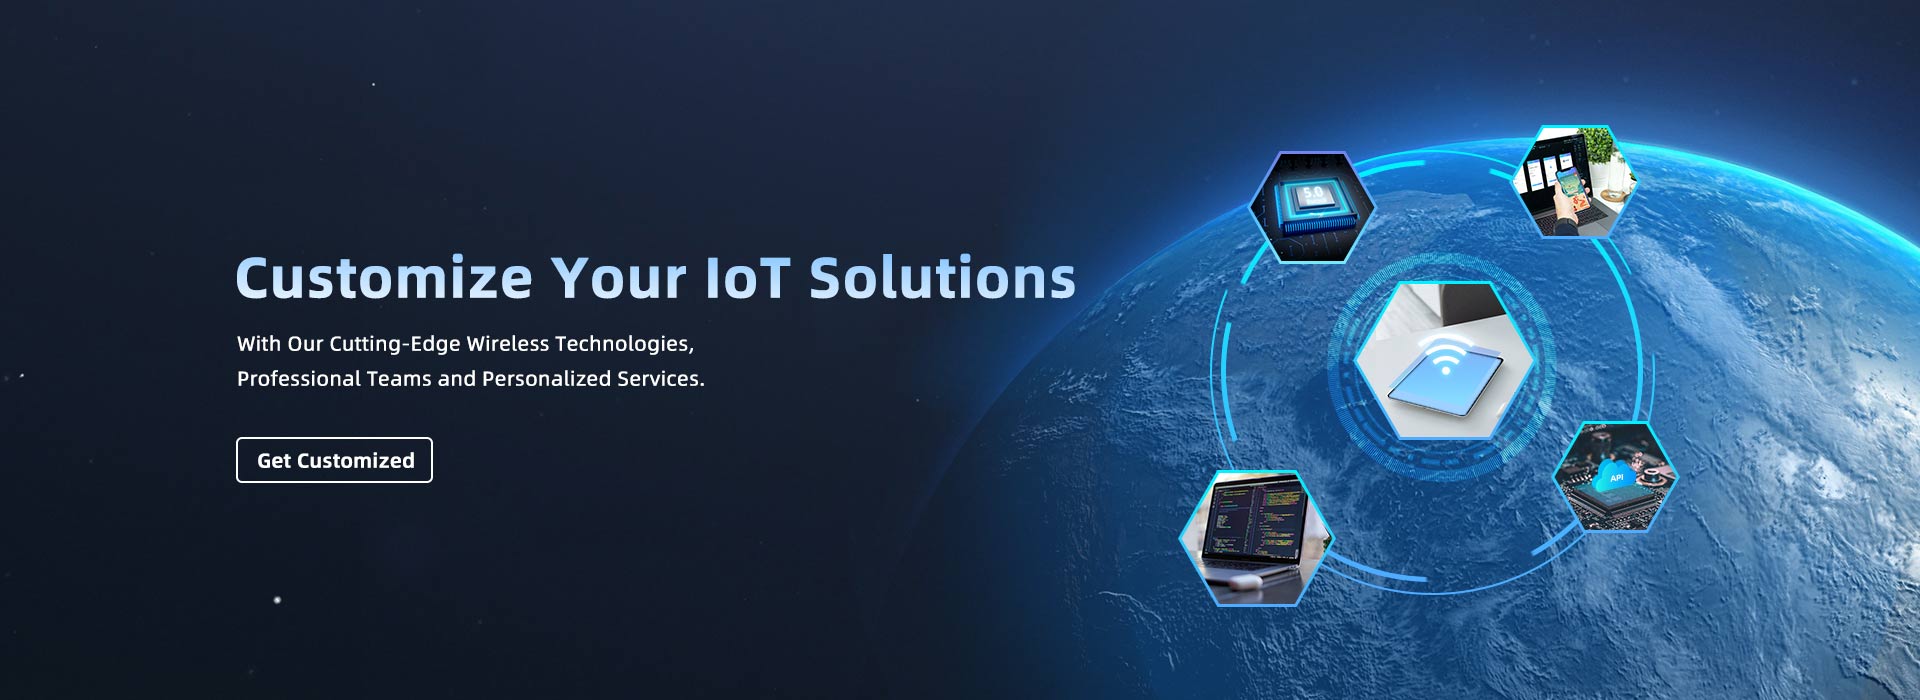 Customize Your IoT Solutions With Our Cutting-Edge Wireless Technologies, Professional Teams and Personalized Services.